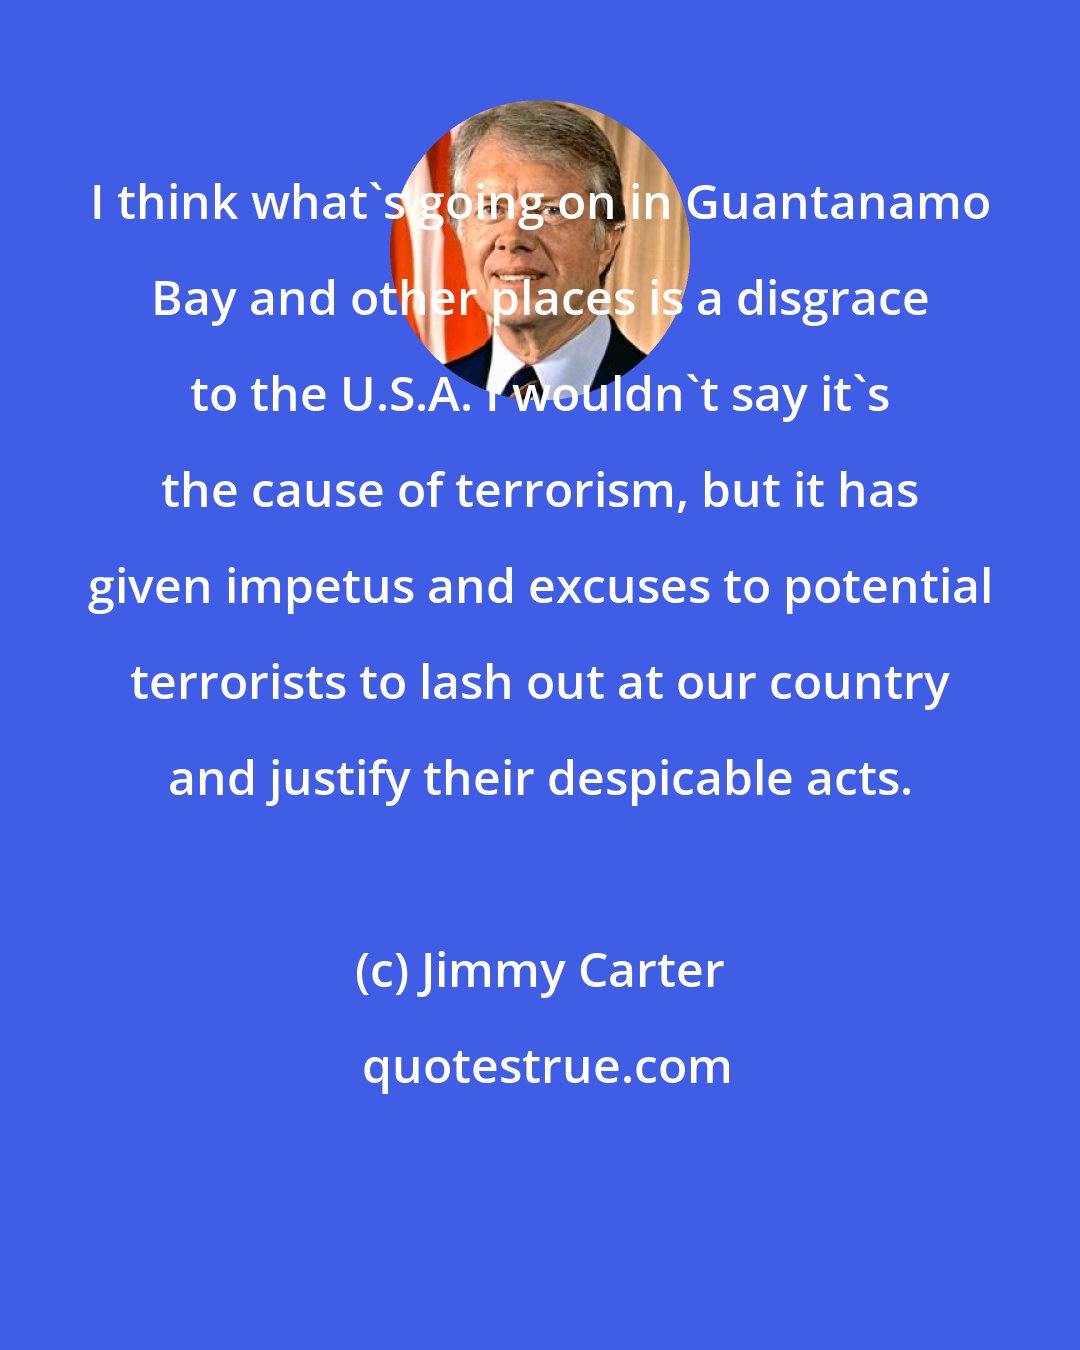 Jimmy Carter: I think what's going on in Guantanamo Bay and other places is a disgrace to the U.S.A. I wouldn't say it's the cause of terrorism, but it has given impetus and excuses to potential terrorists to lash out at our country and justify their despicable acts.